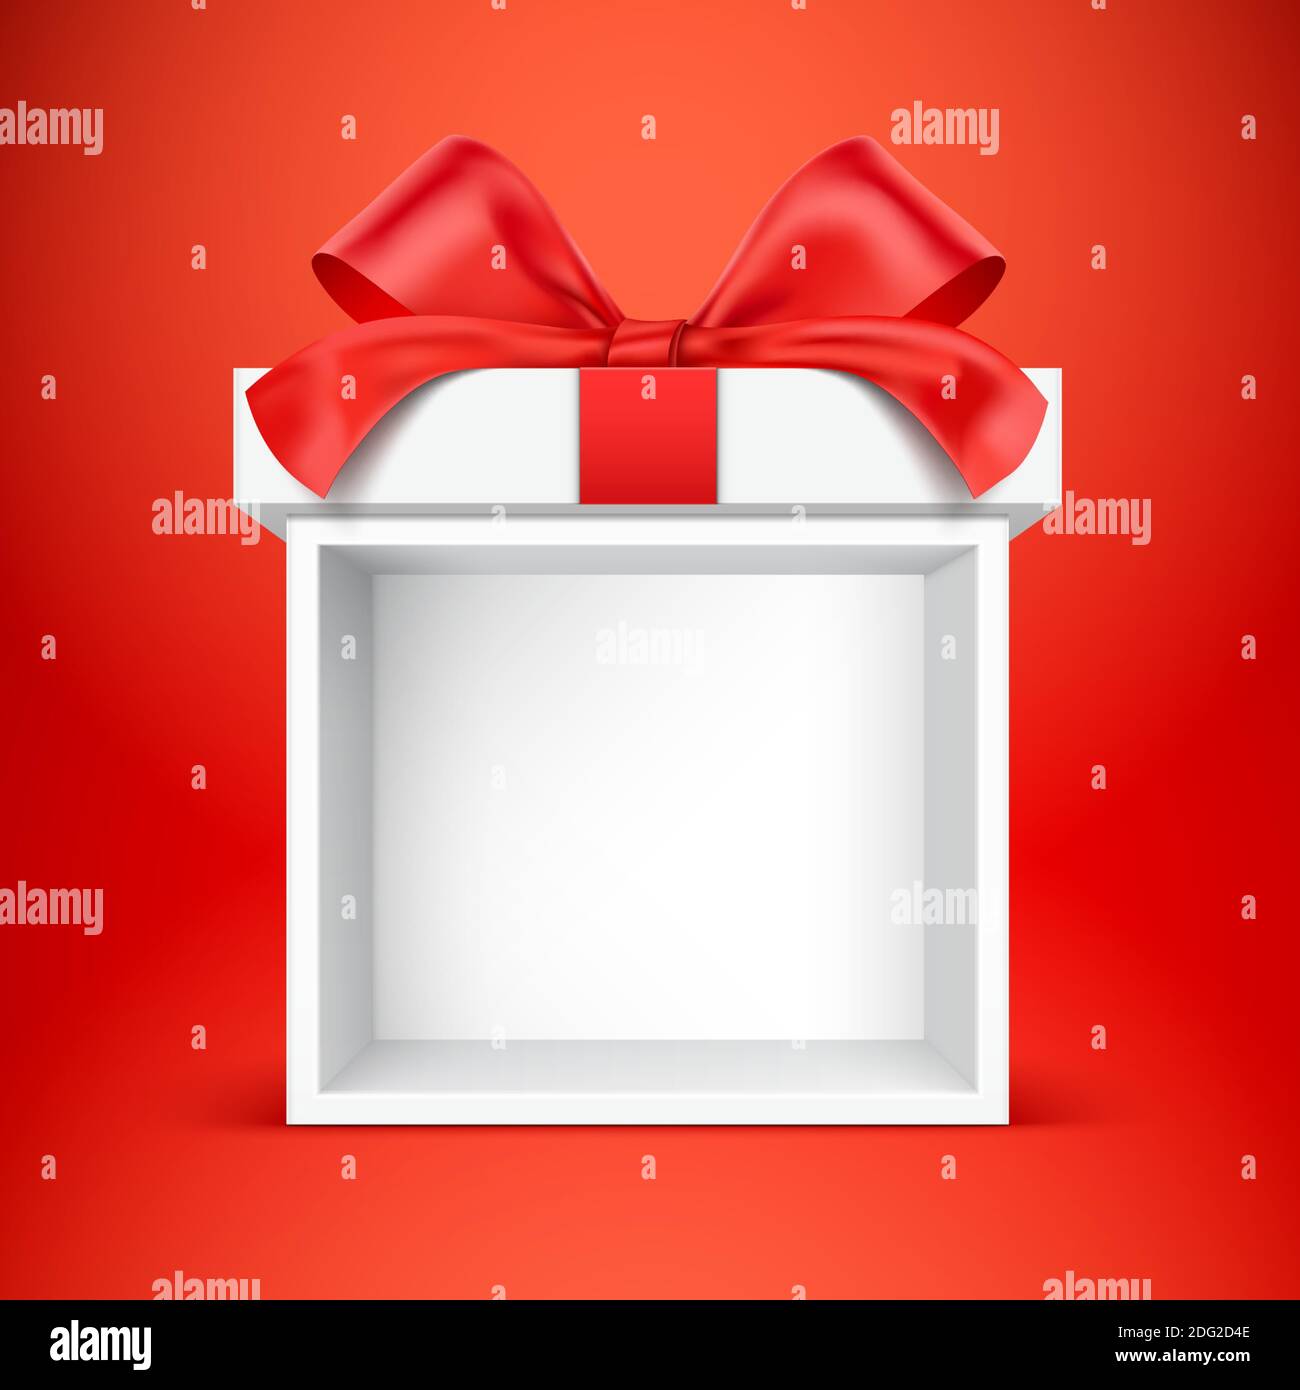 Empty gift box kiosk. Vector illustration of white present box on the red background, with clear space for product placement. Gift box creative display stand, with red satin ribbon and bow. Stock Vector